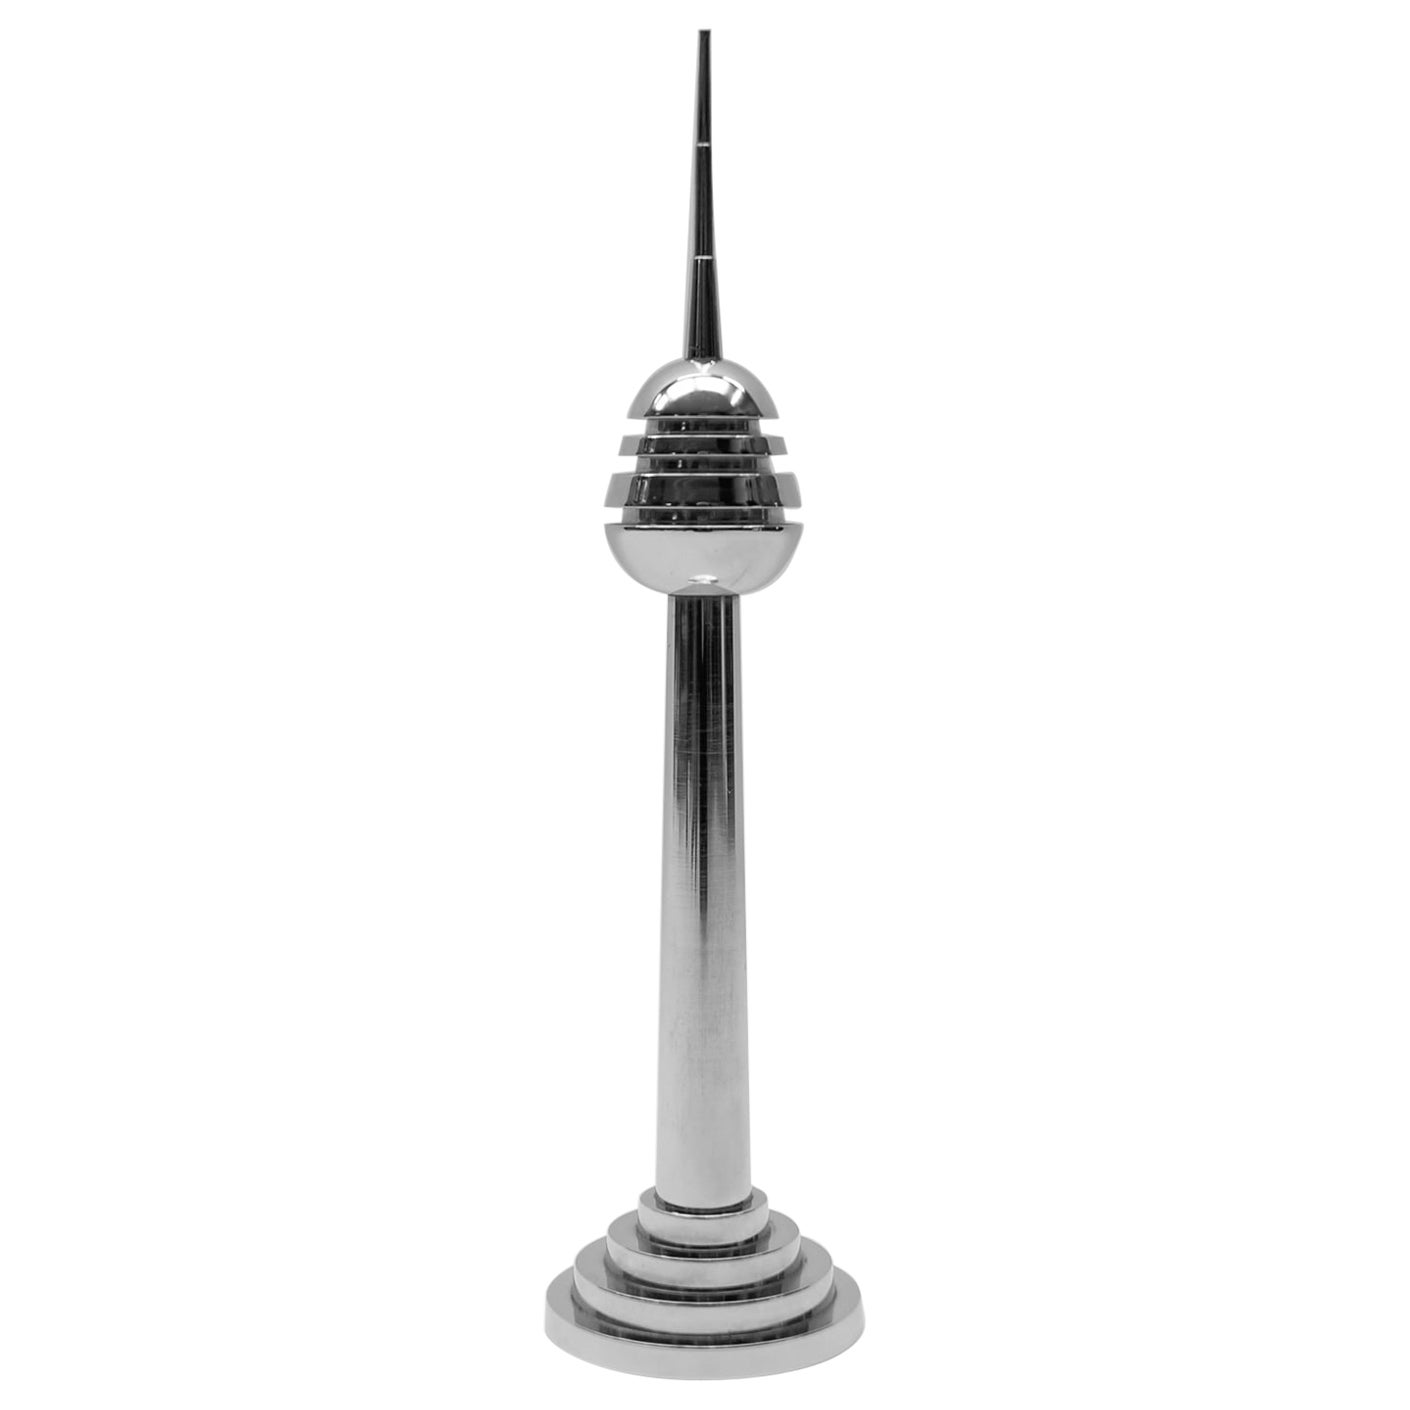 Large and Heavy Mid-Century Modern Tv-Tower Sculpture, 1970s For Sale